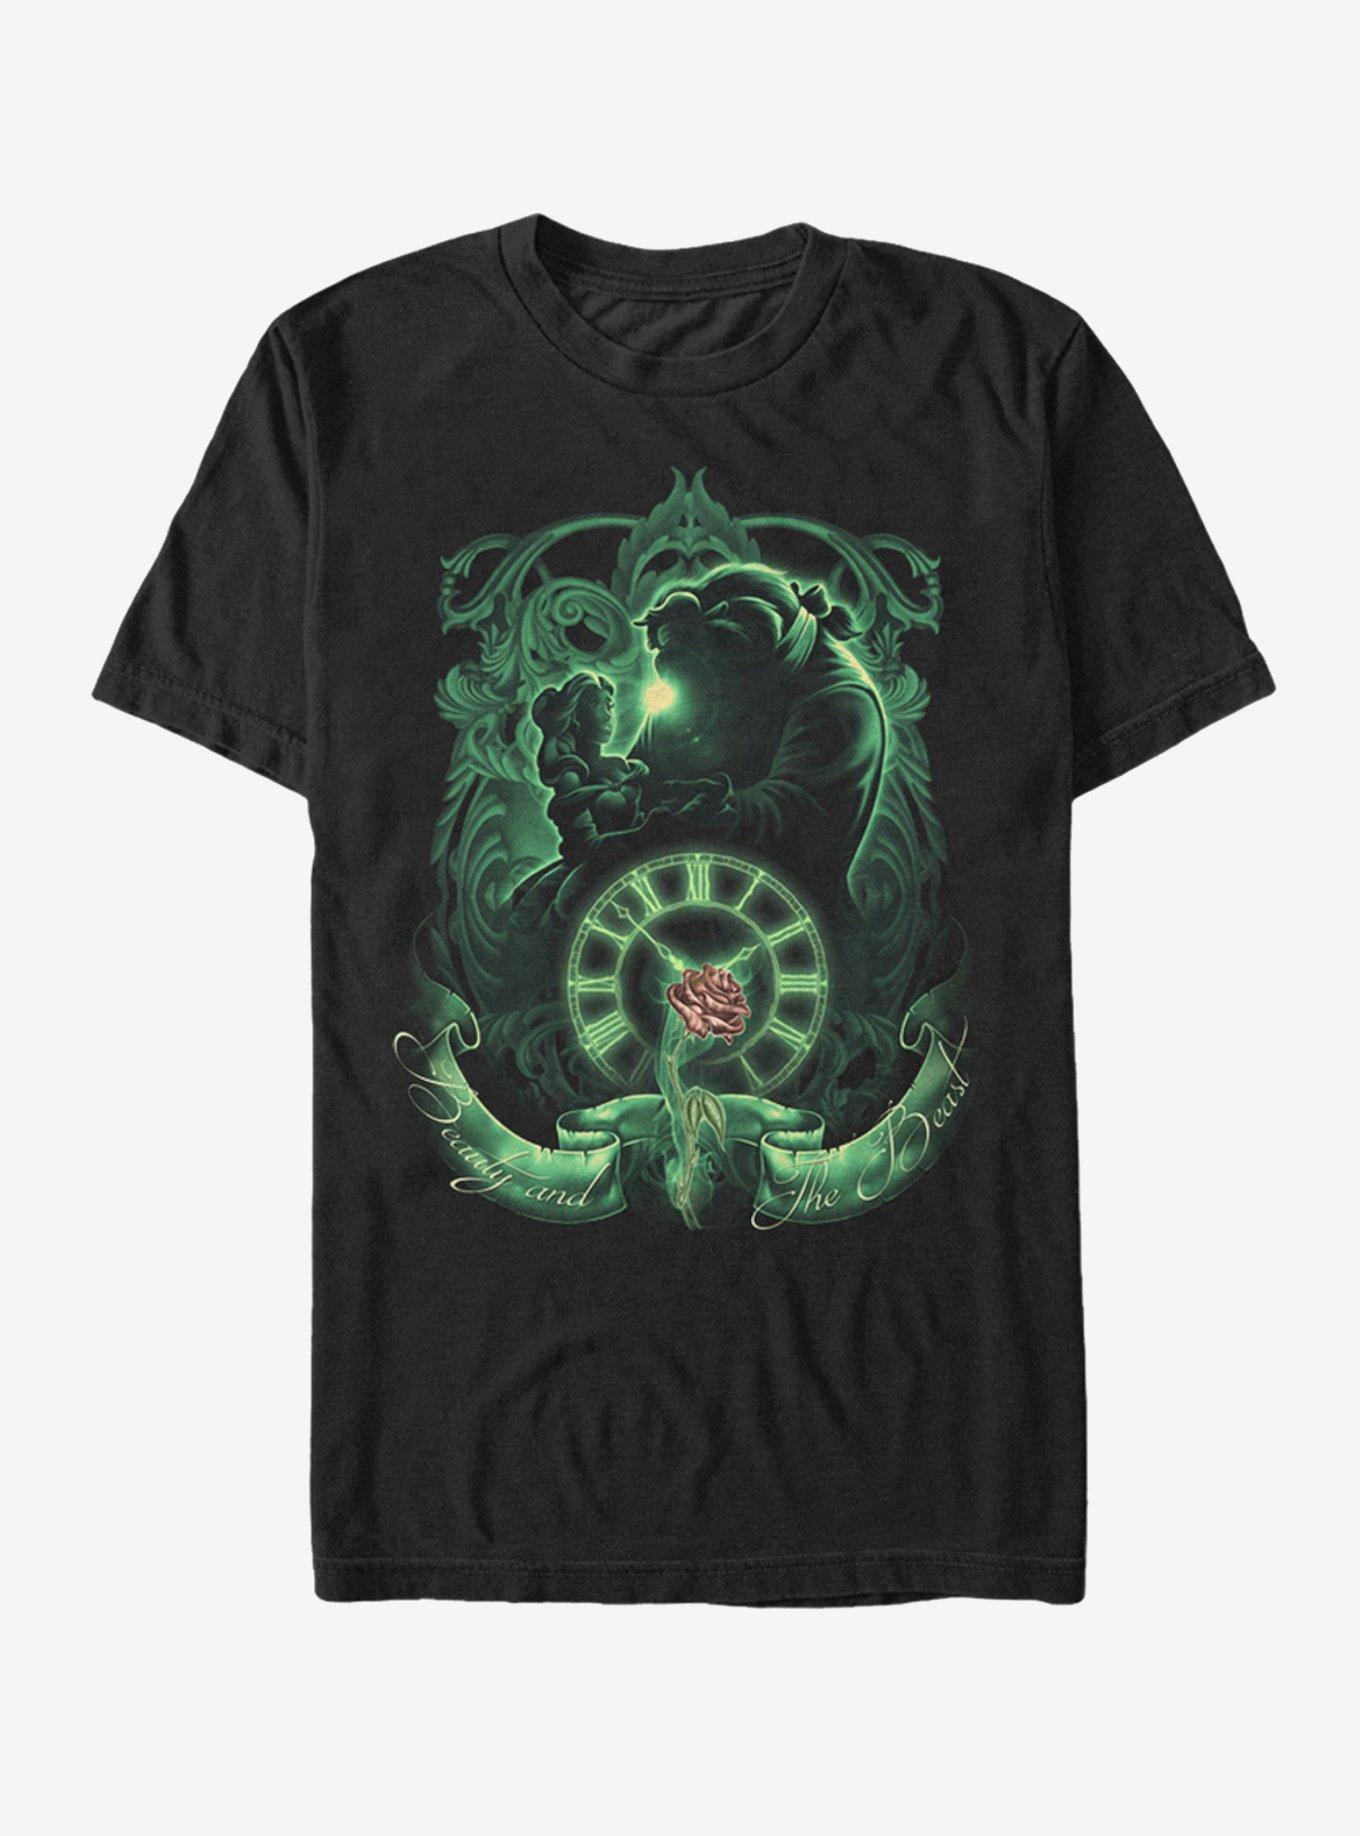 Disney Beauty And The Beast Green Time T-Shirt, BLACK, hi-res